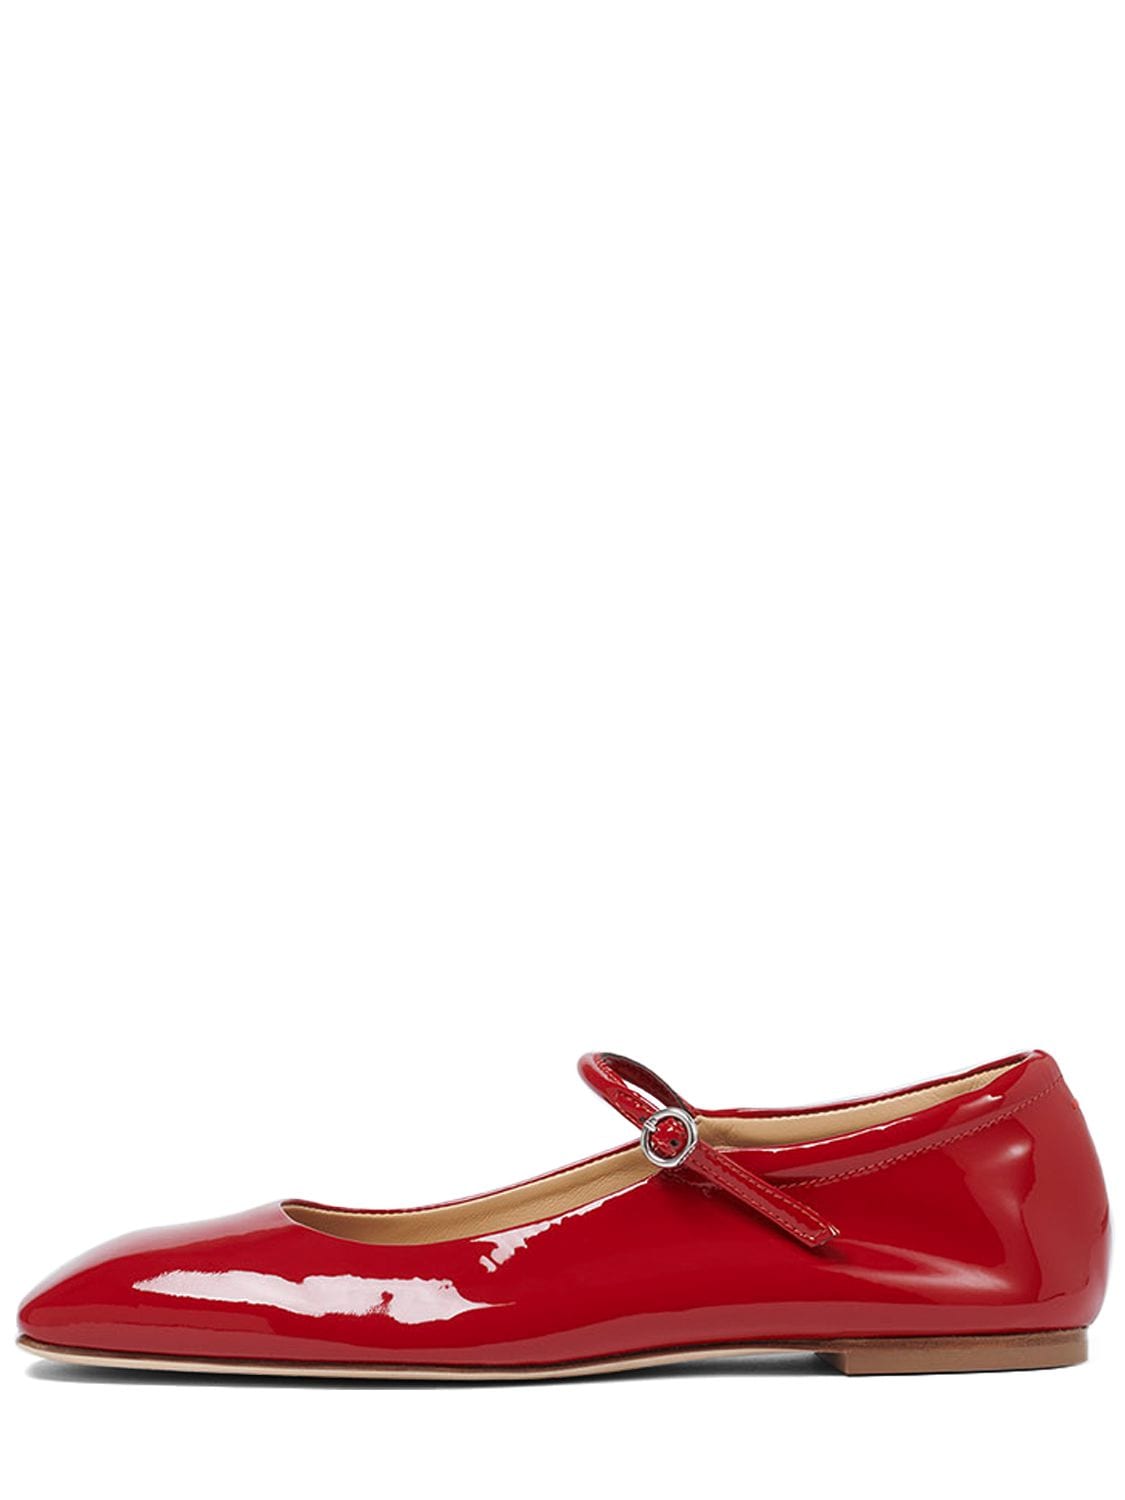 Aeyde 10mm Uma Patent Leather Flats In Red | ModeSens